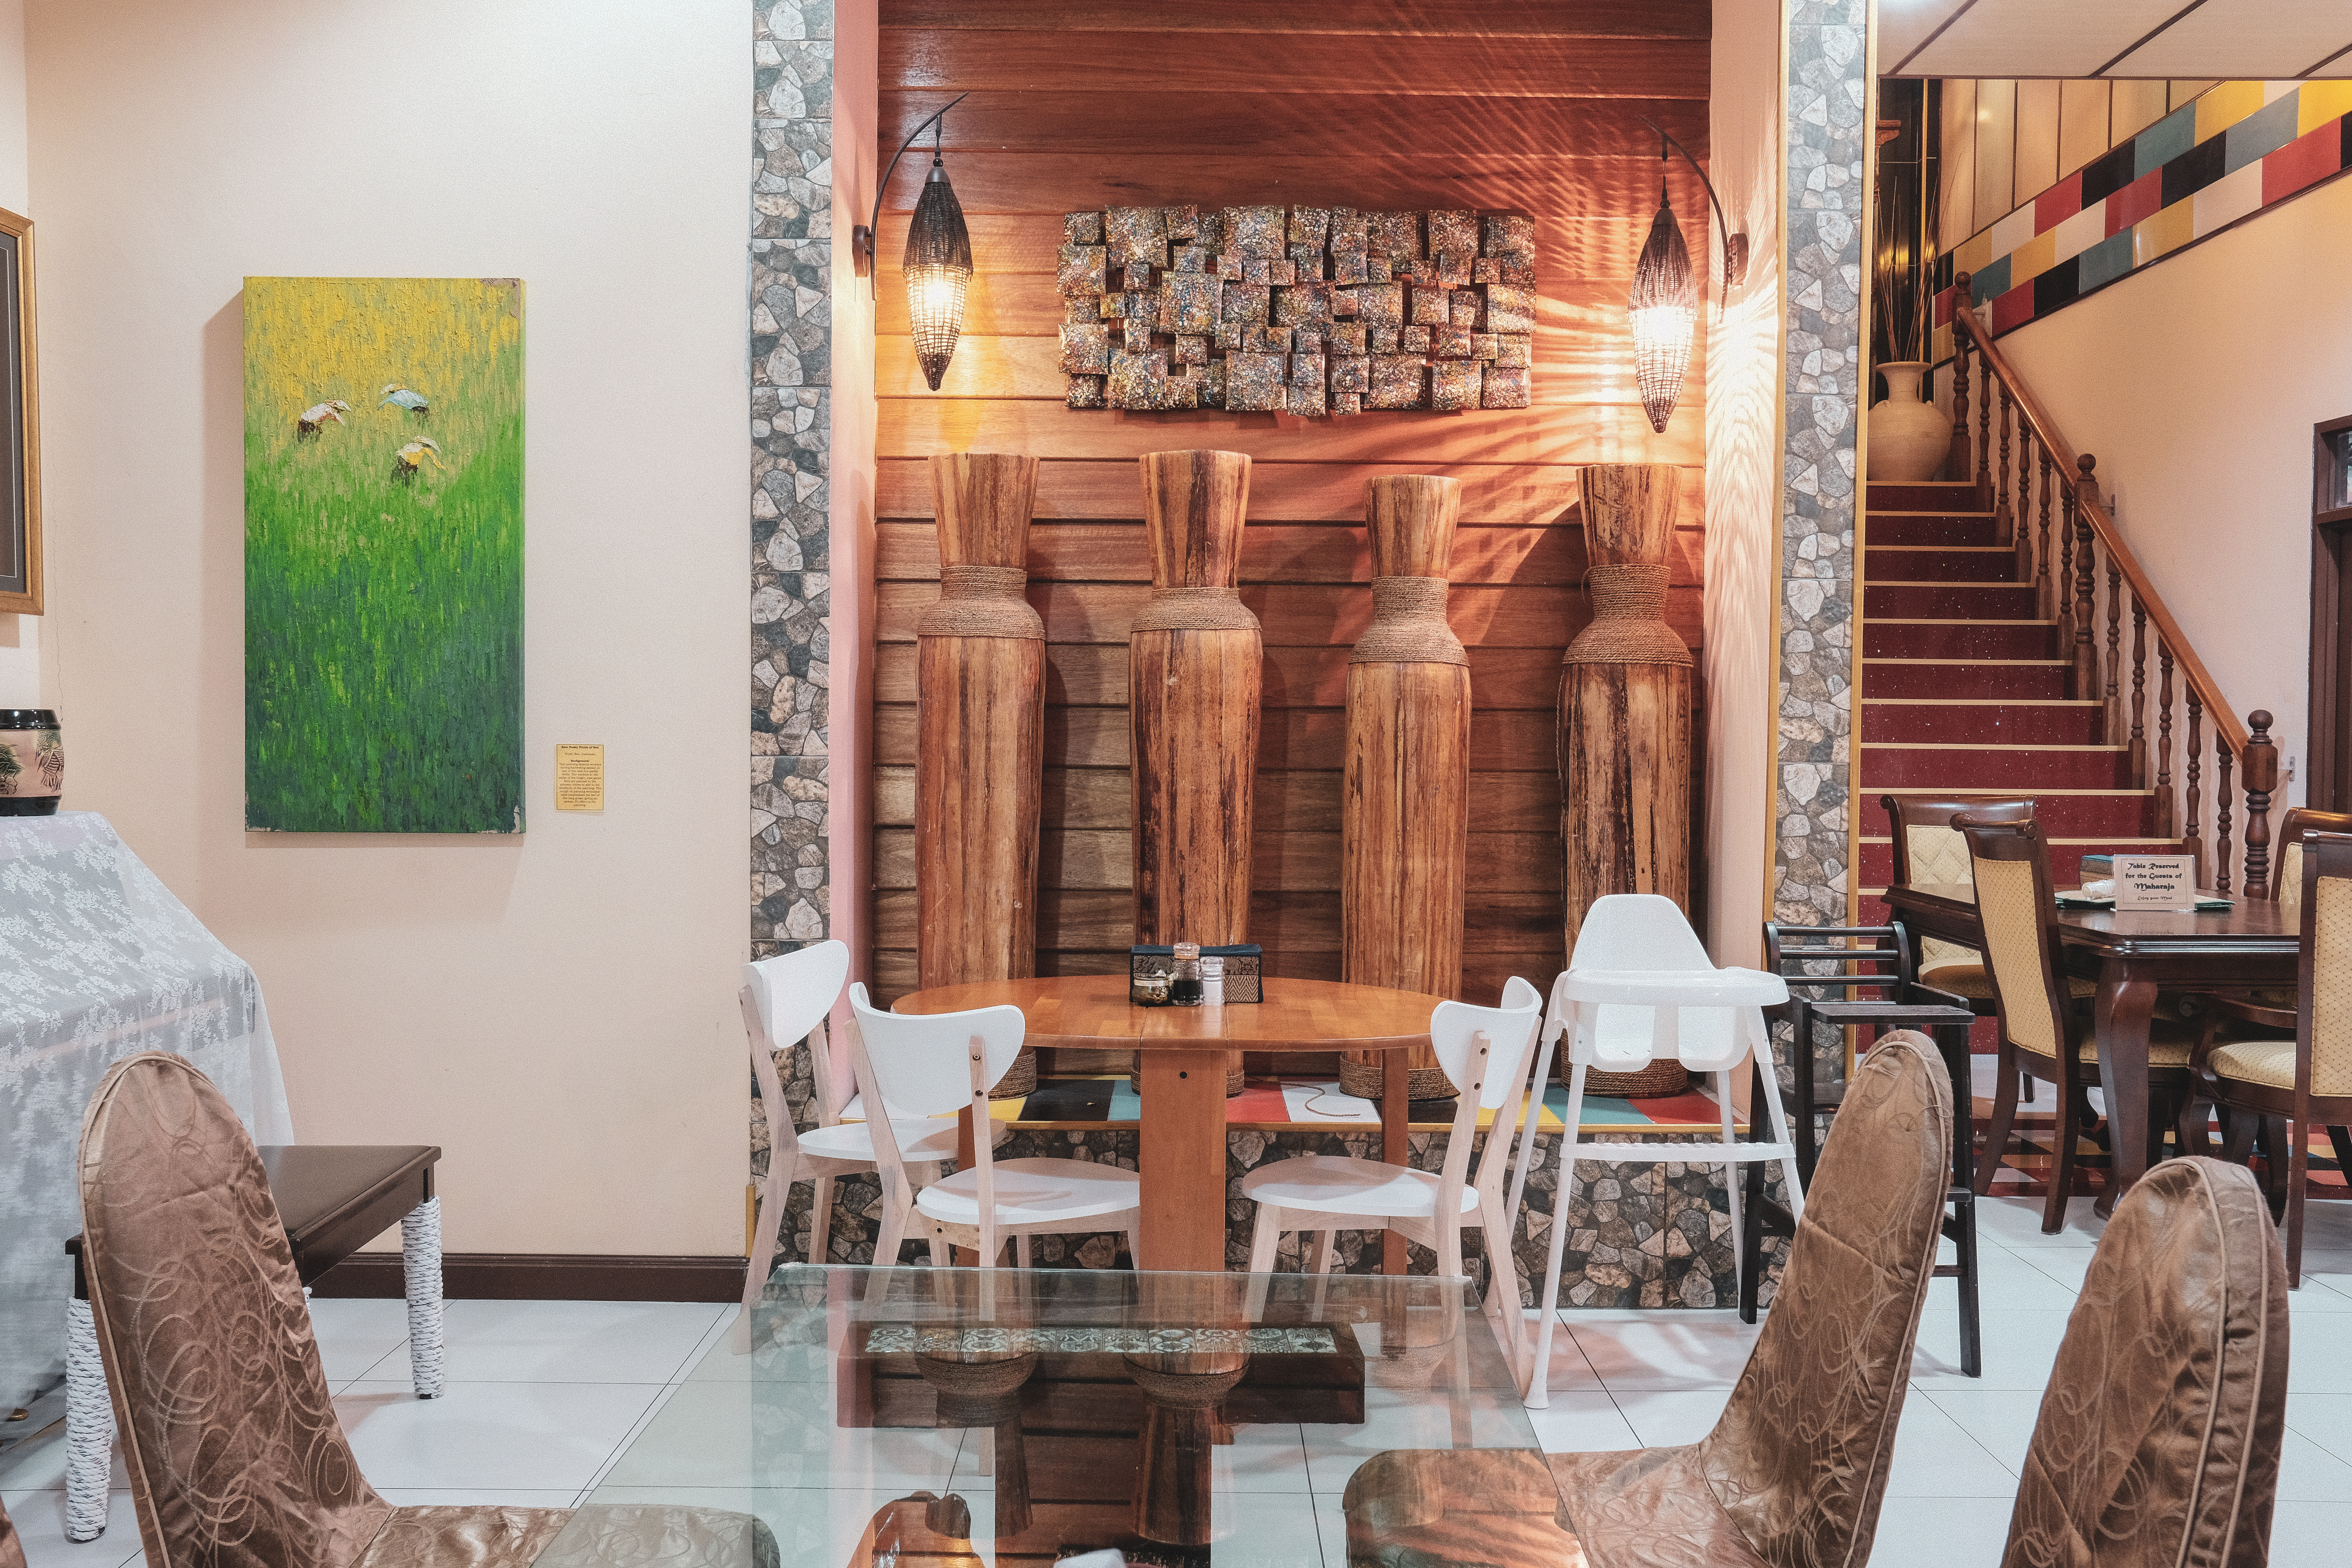 Slender, wooden vases, a collection of tropical-themed paintings and a smattering of colourful tiles add warmth and cheer to the dining hall, which used to be the Chews’ living room.